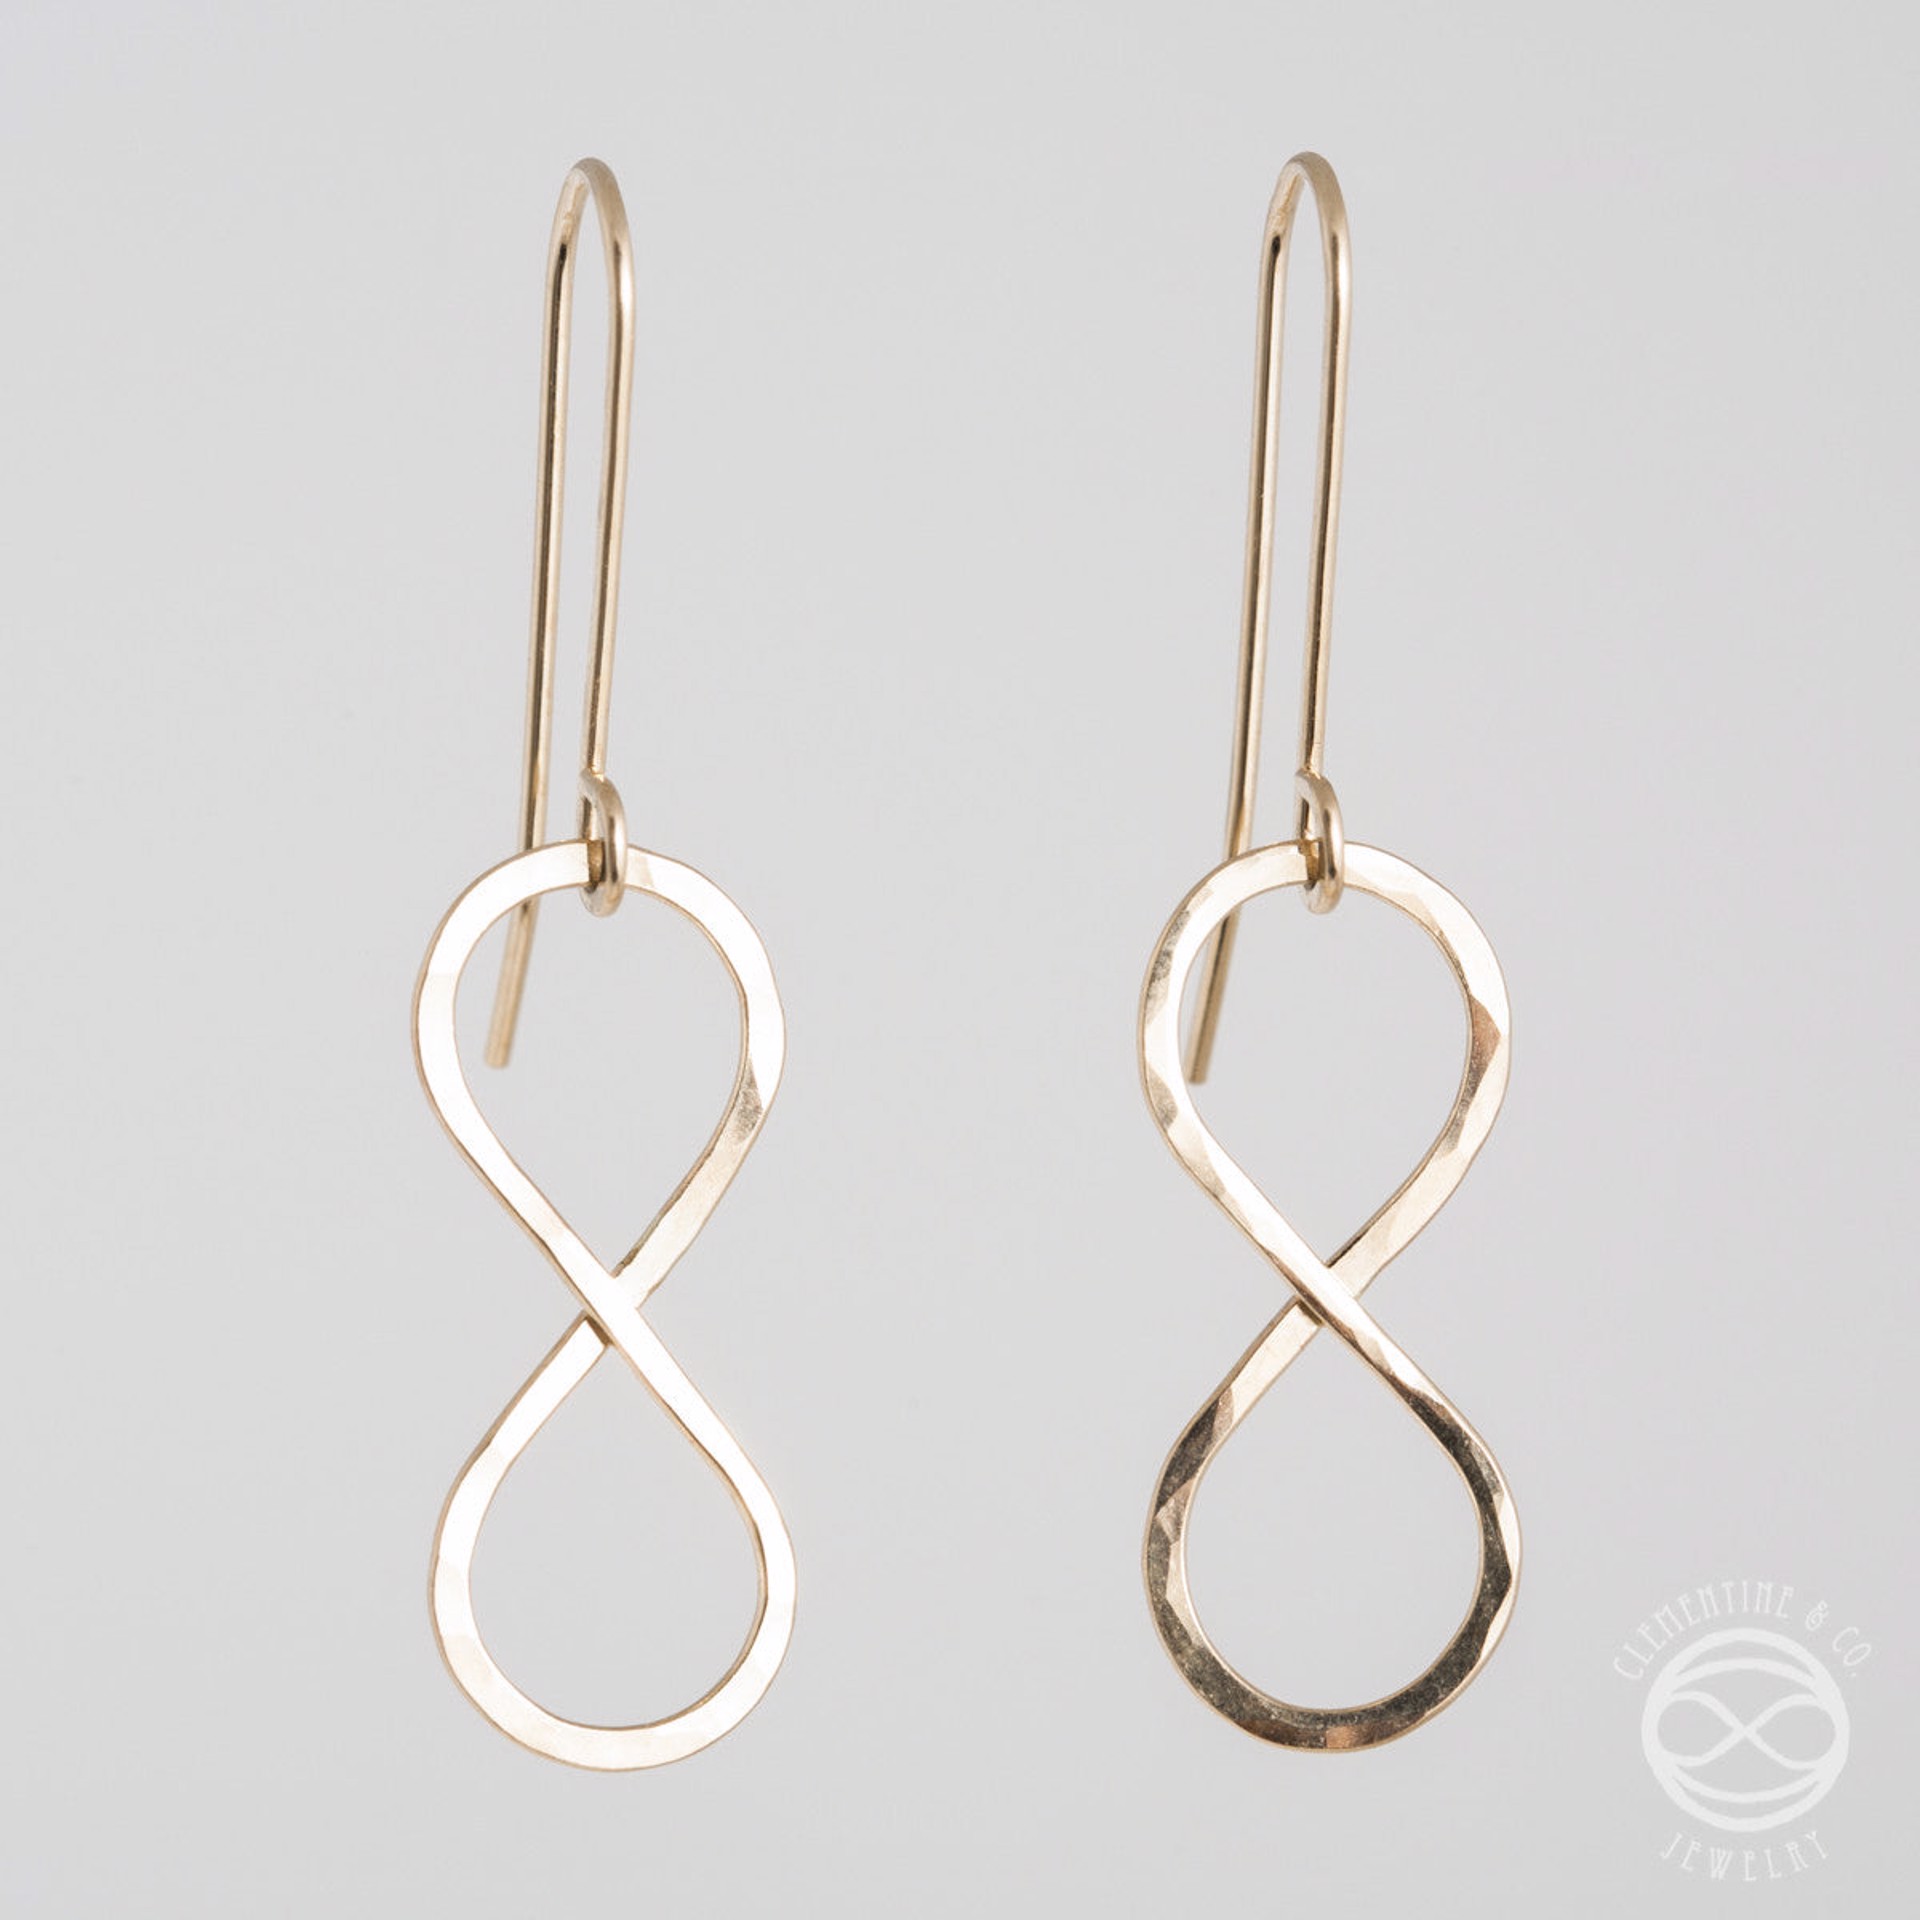 Infinity Earrings in Gold by Clementine & Co. Jewelry